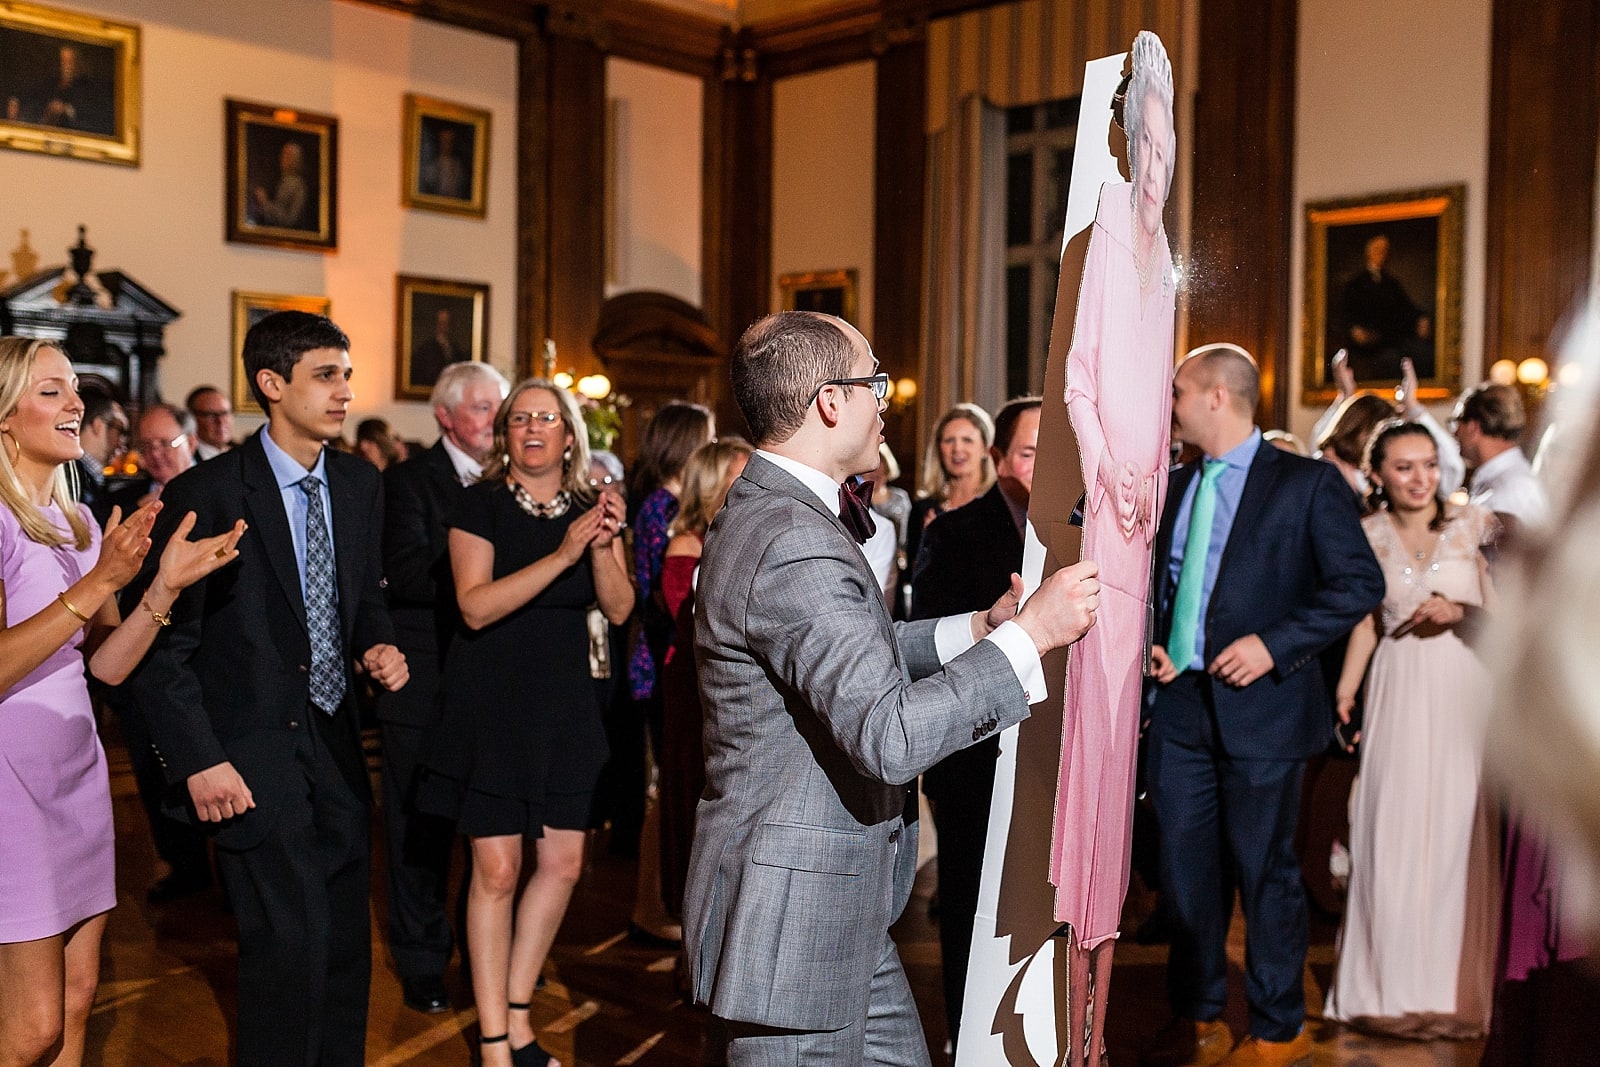 Groom dancing with cardboard cutout of the Queen of England, College of Physicians wedding